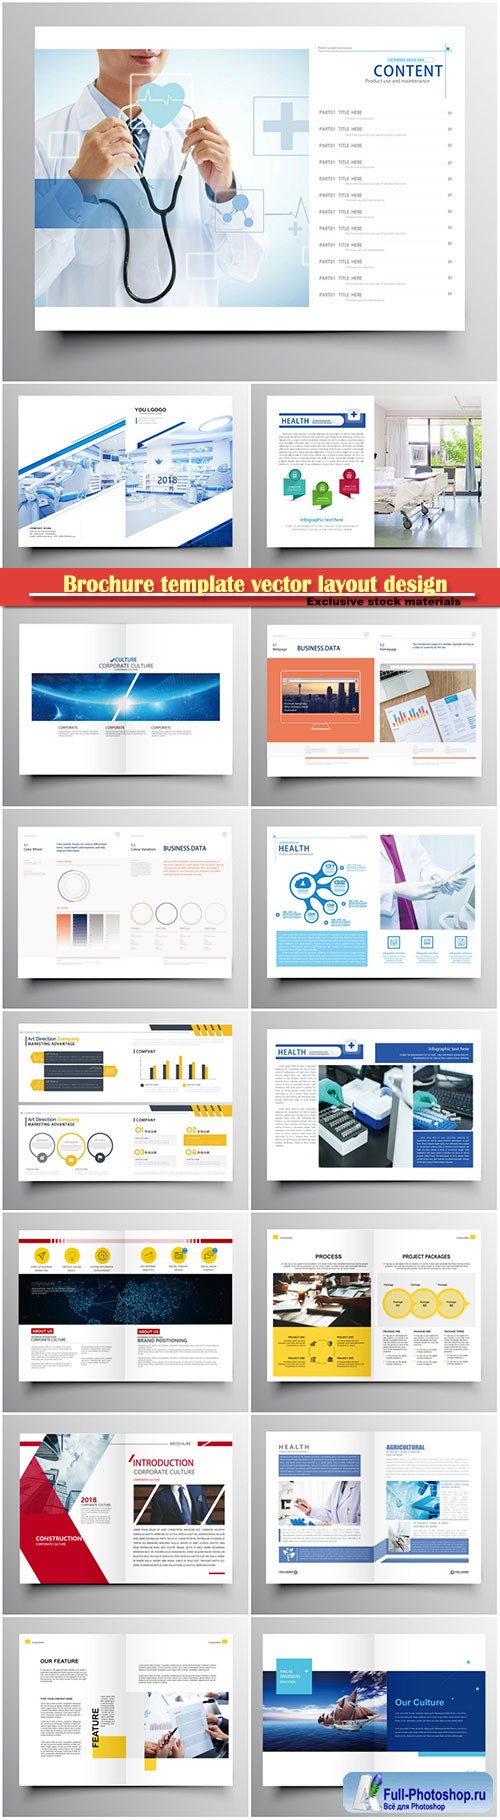 Brochure template vector layout design, corporate business annual report, magazine, flyer mockup # 126